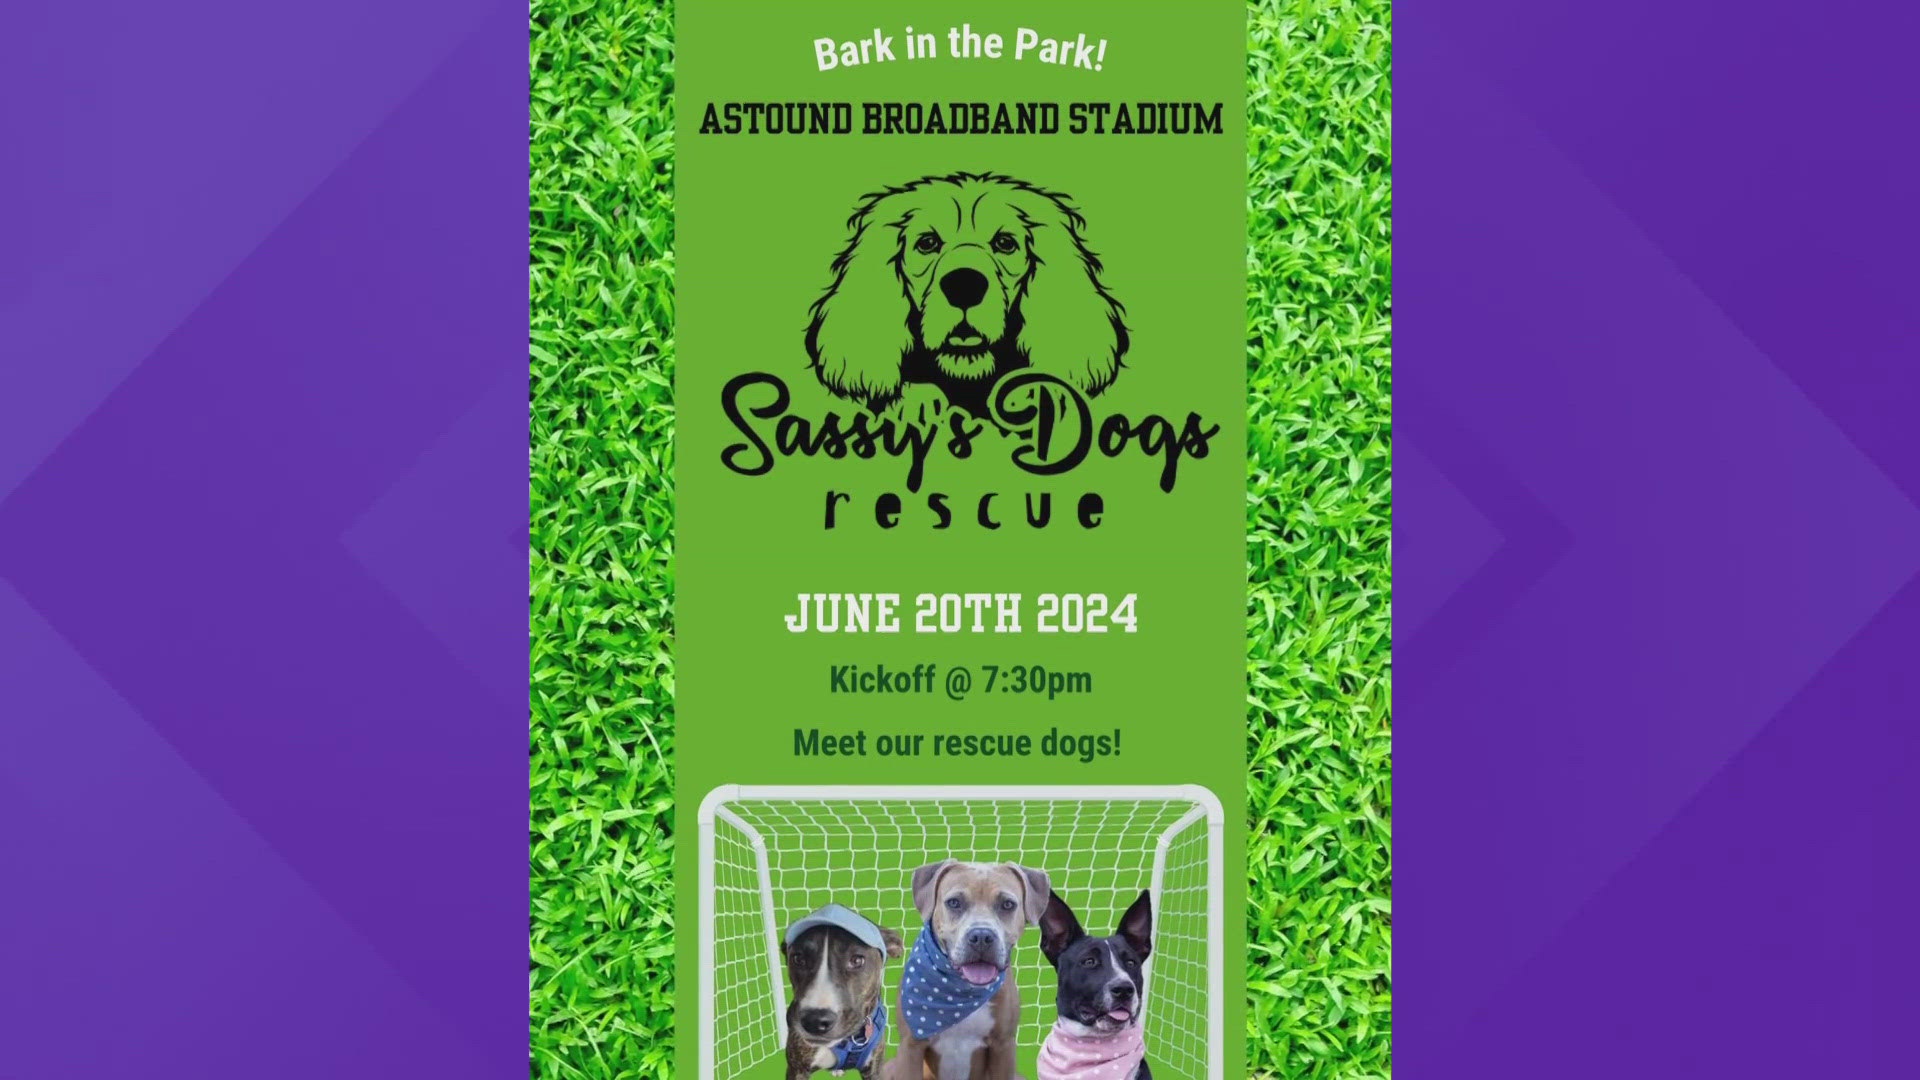 There will be Sassy's Dog Rescue merchandise for purchase and a chance to meet some of the rescue dogs.